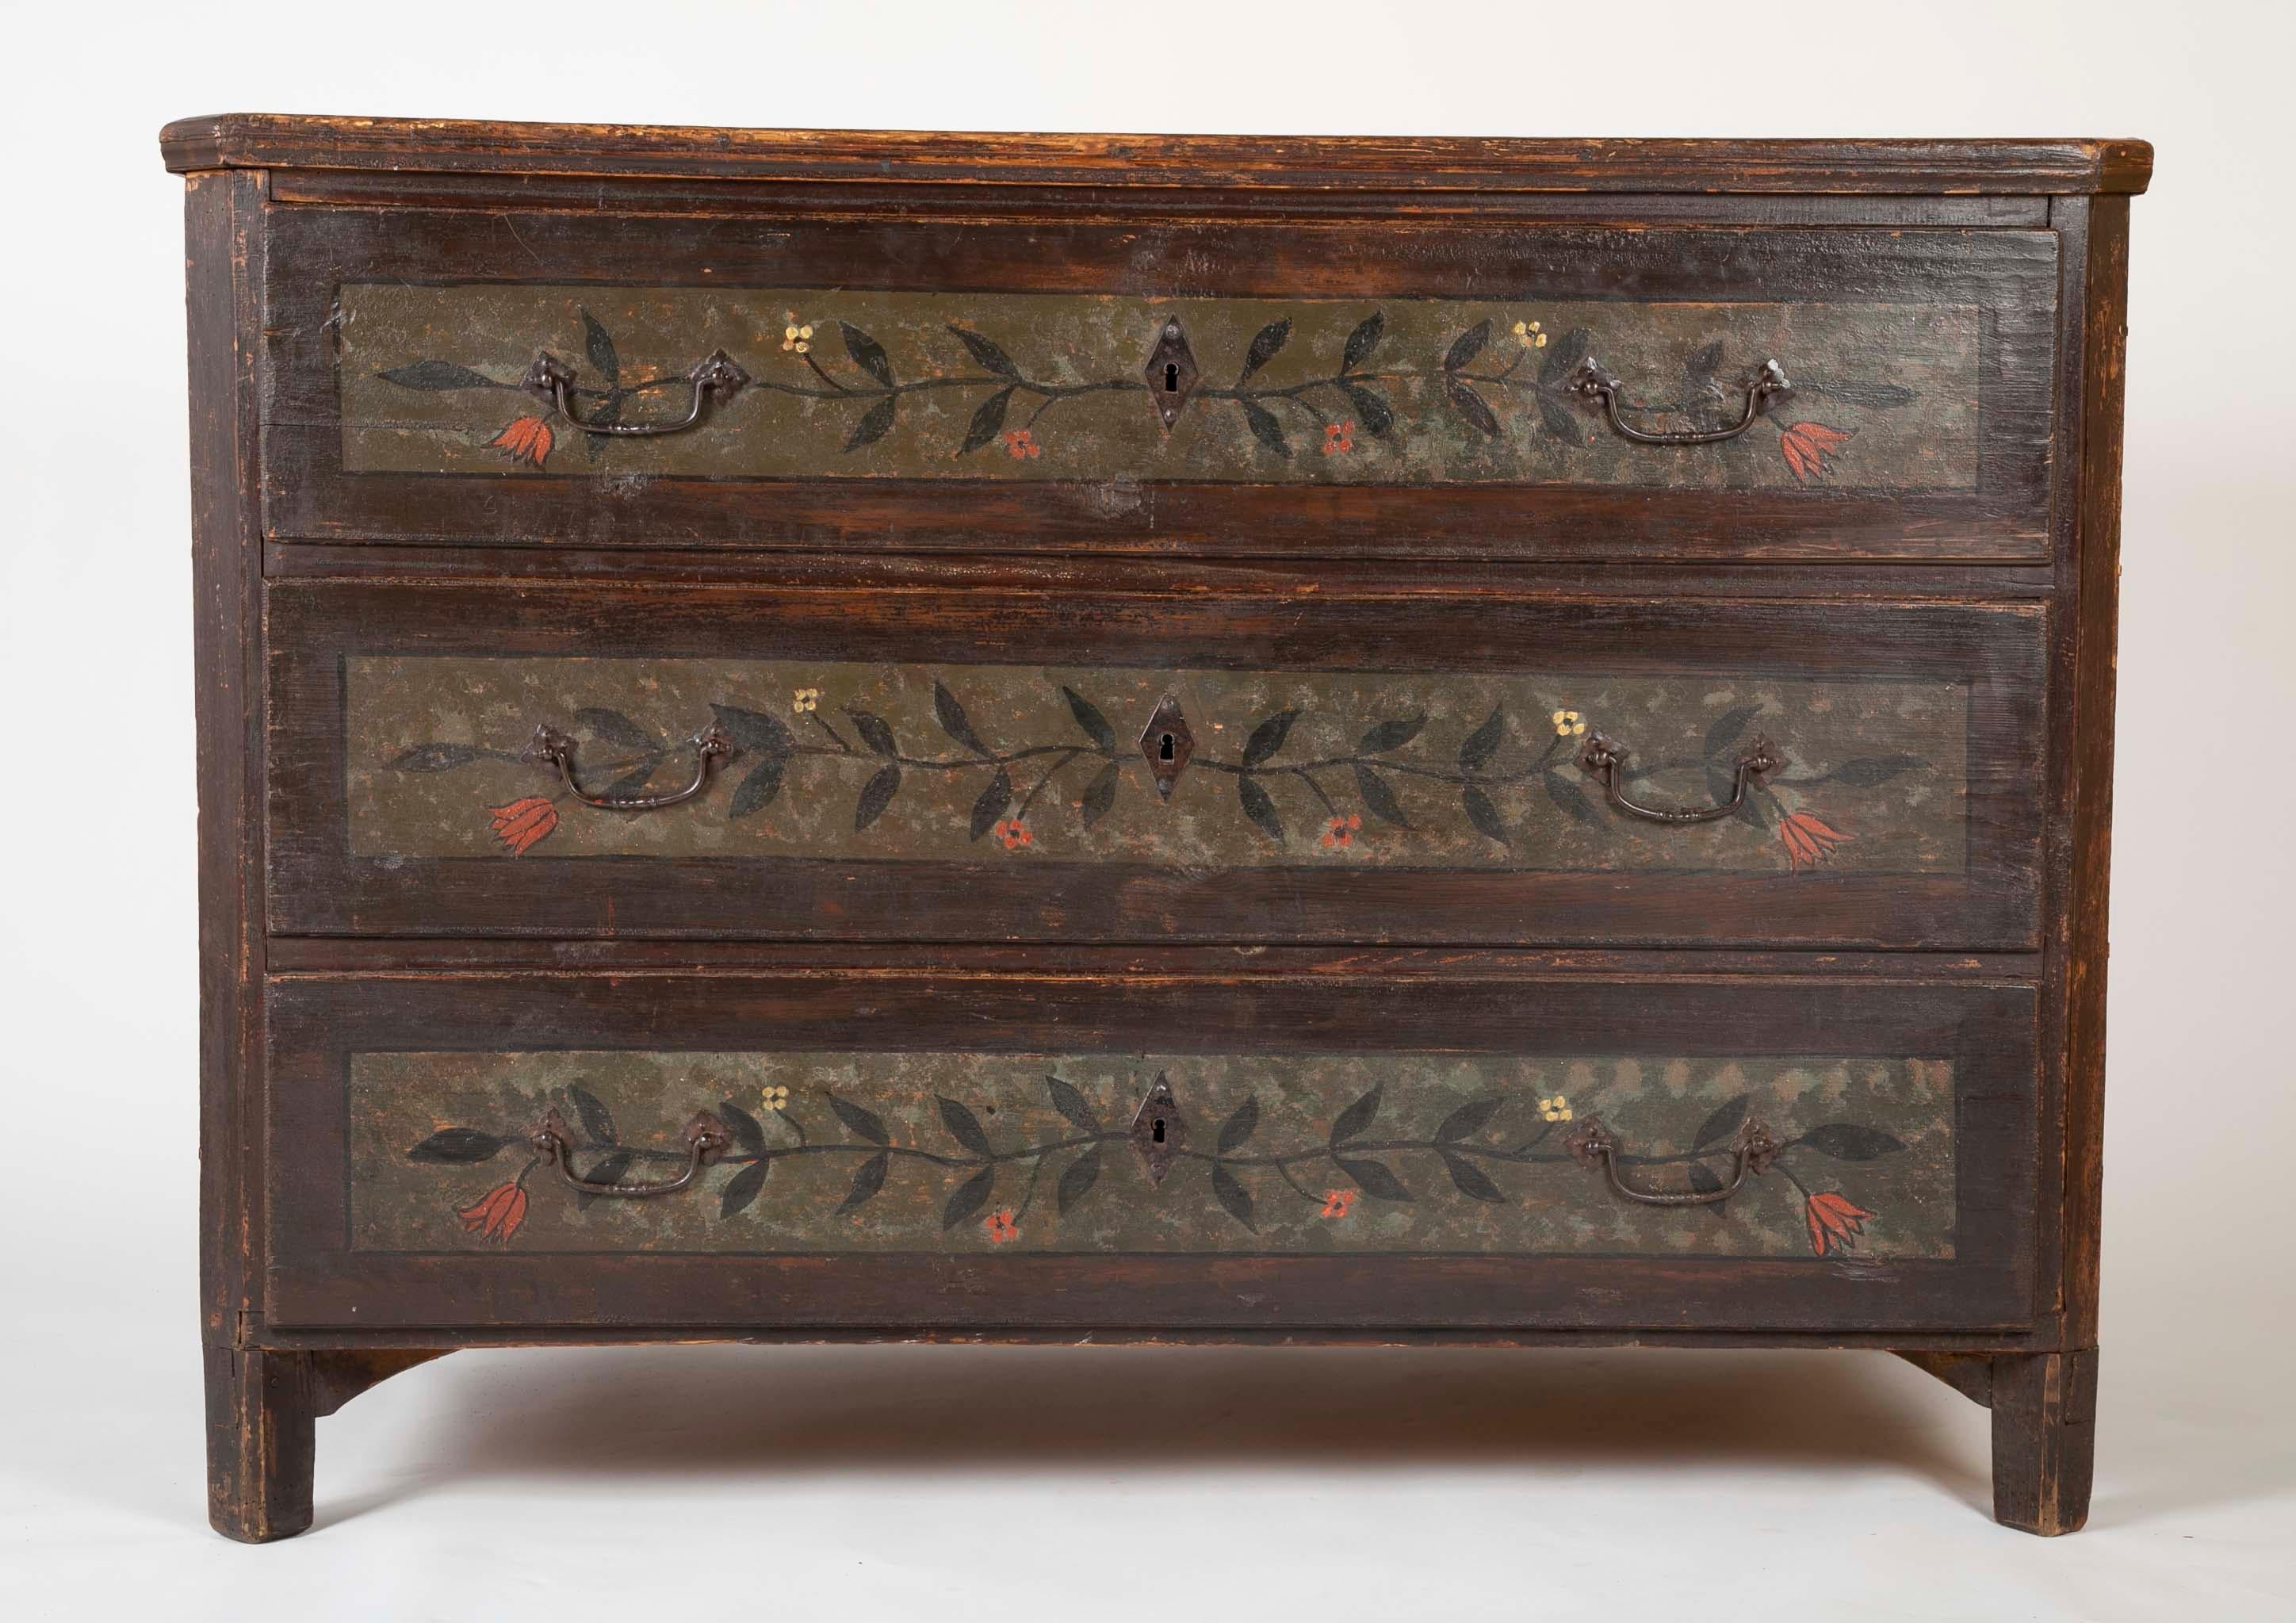 A three-drawer Continental pine chest with poly-chrome floral decoration. Possibly Norwegian.